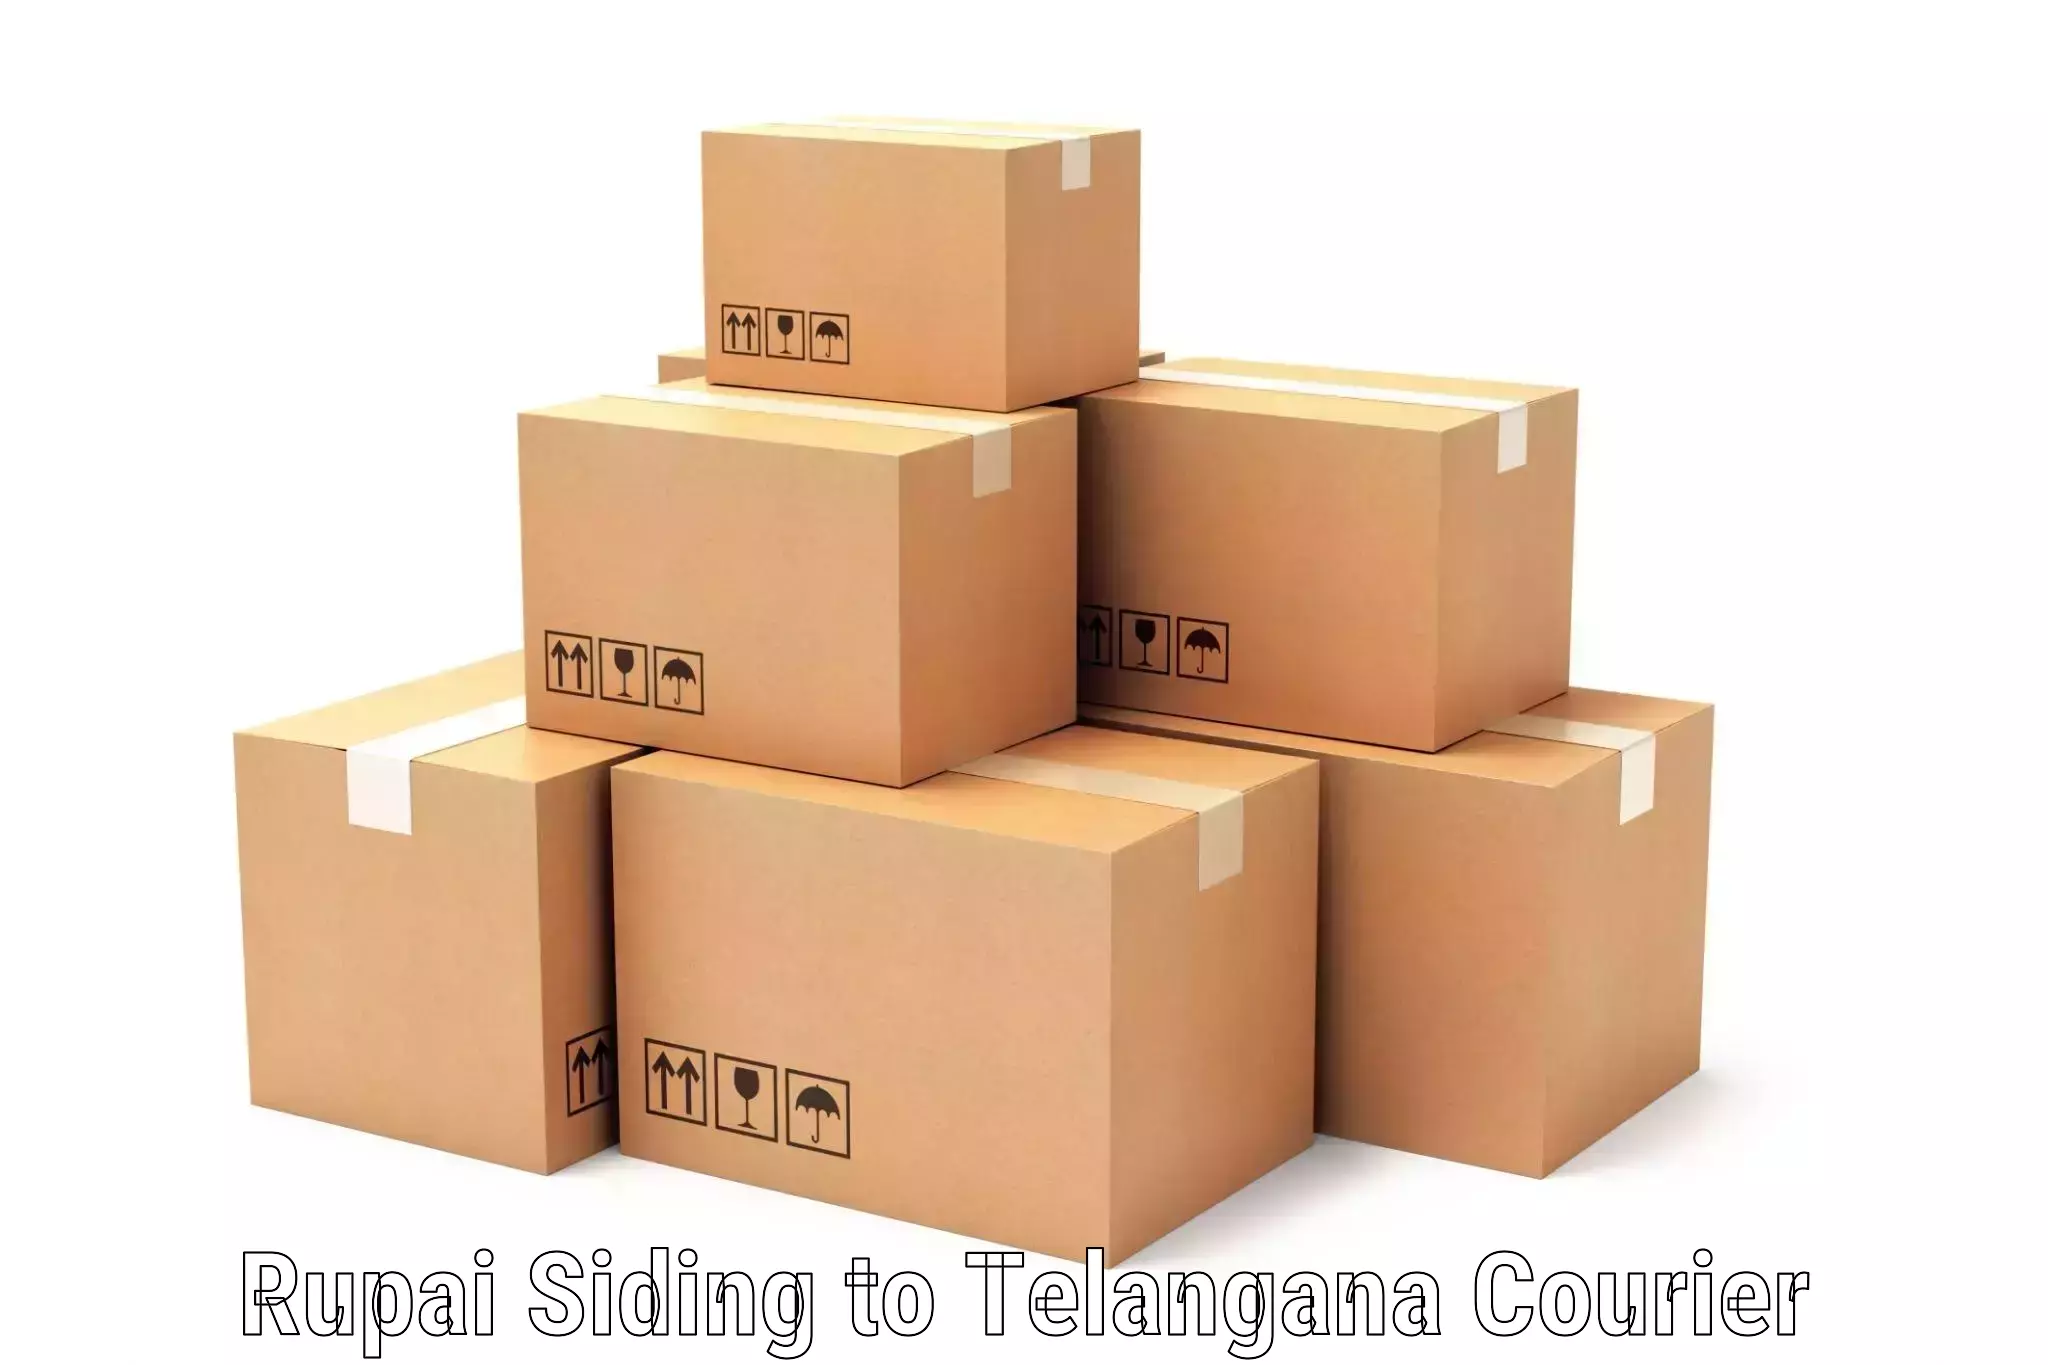 Easy access courier services in Rupai Siding to Hyderabad